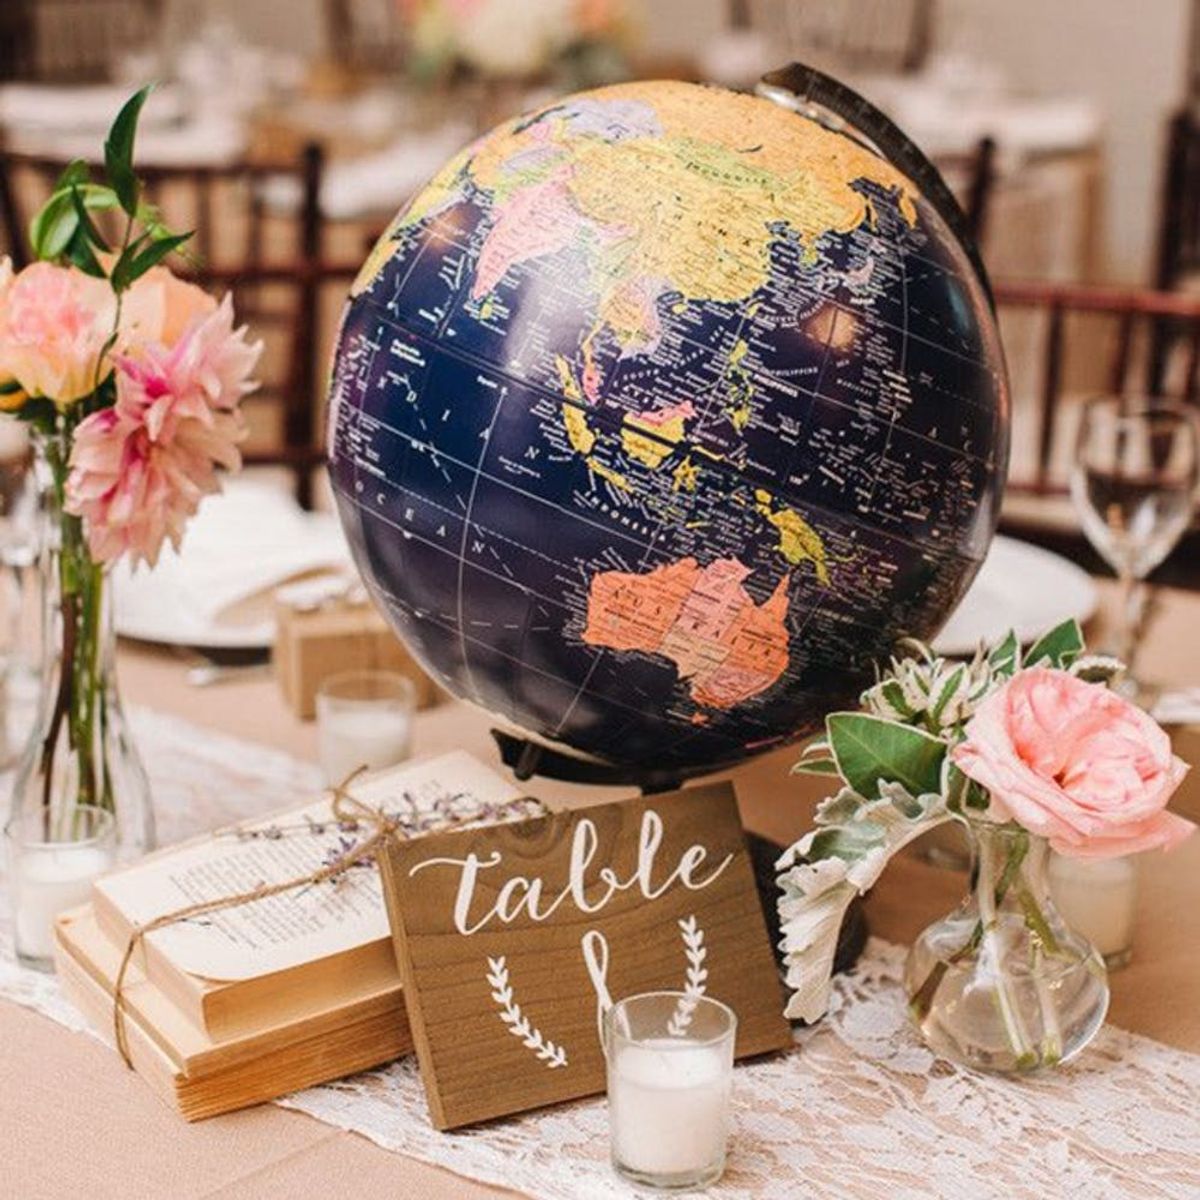 The Best Wedding Theme for Your Big Day, According to Your Zodiac Sign